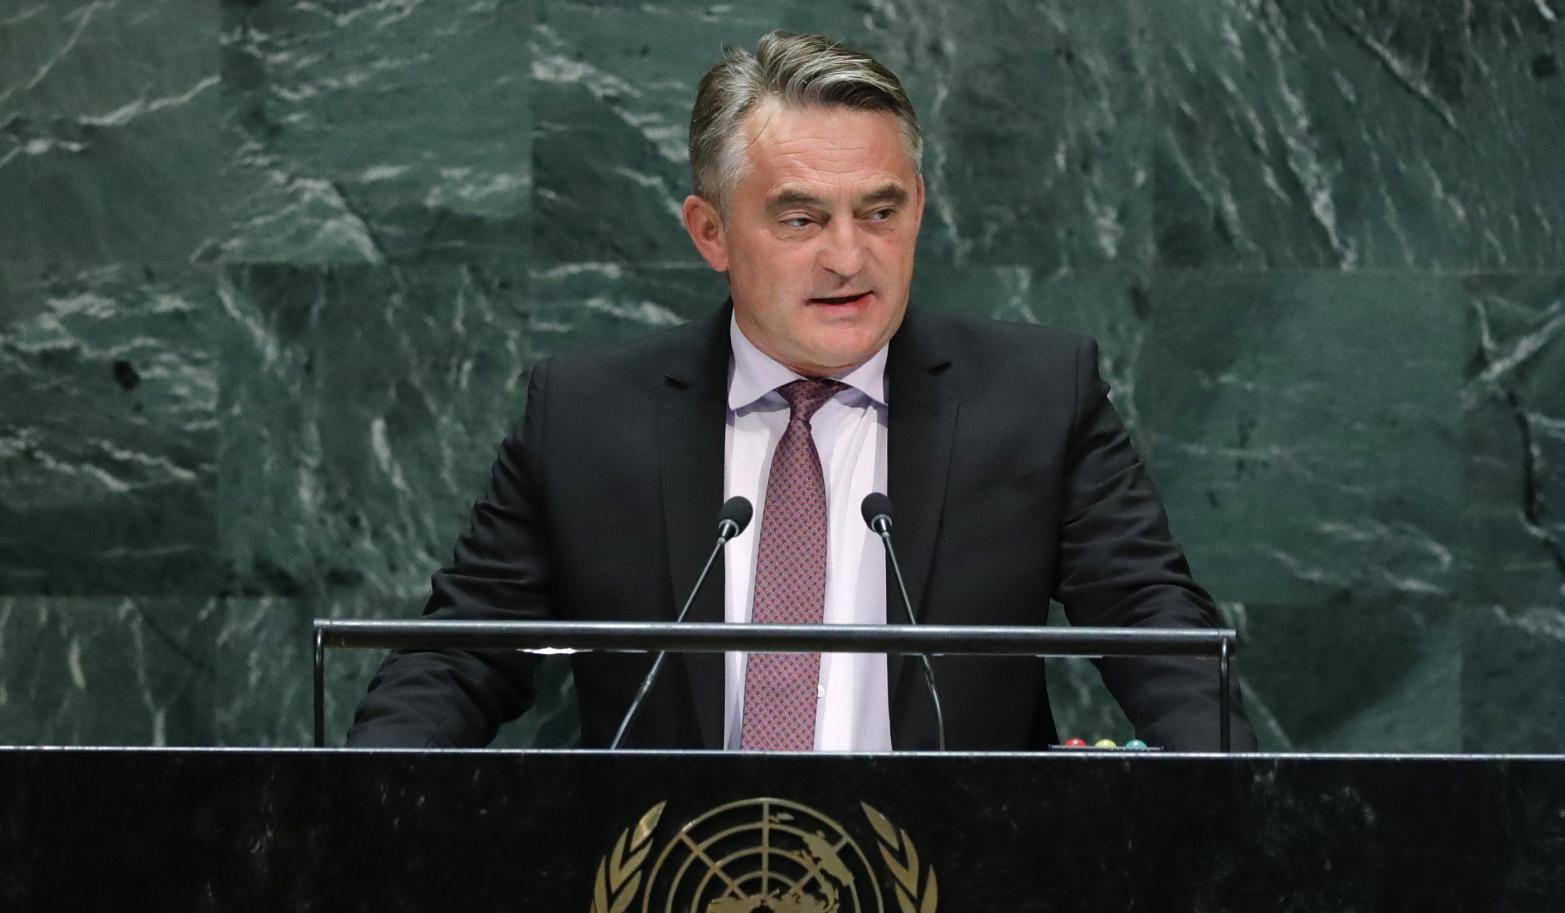 Bosnia and Herzegovina's President Zeljko Komsic addresses the 74th session of the United Nations General Assembly at U.N. headquarters in New York City, New York, U.S.